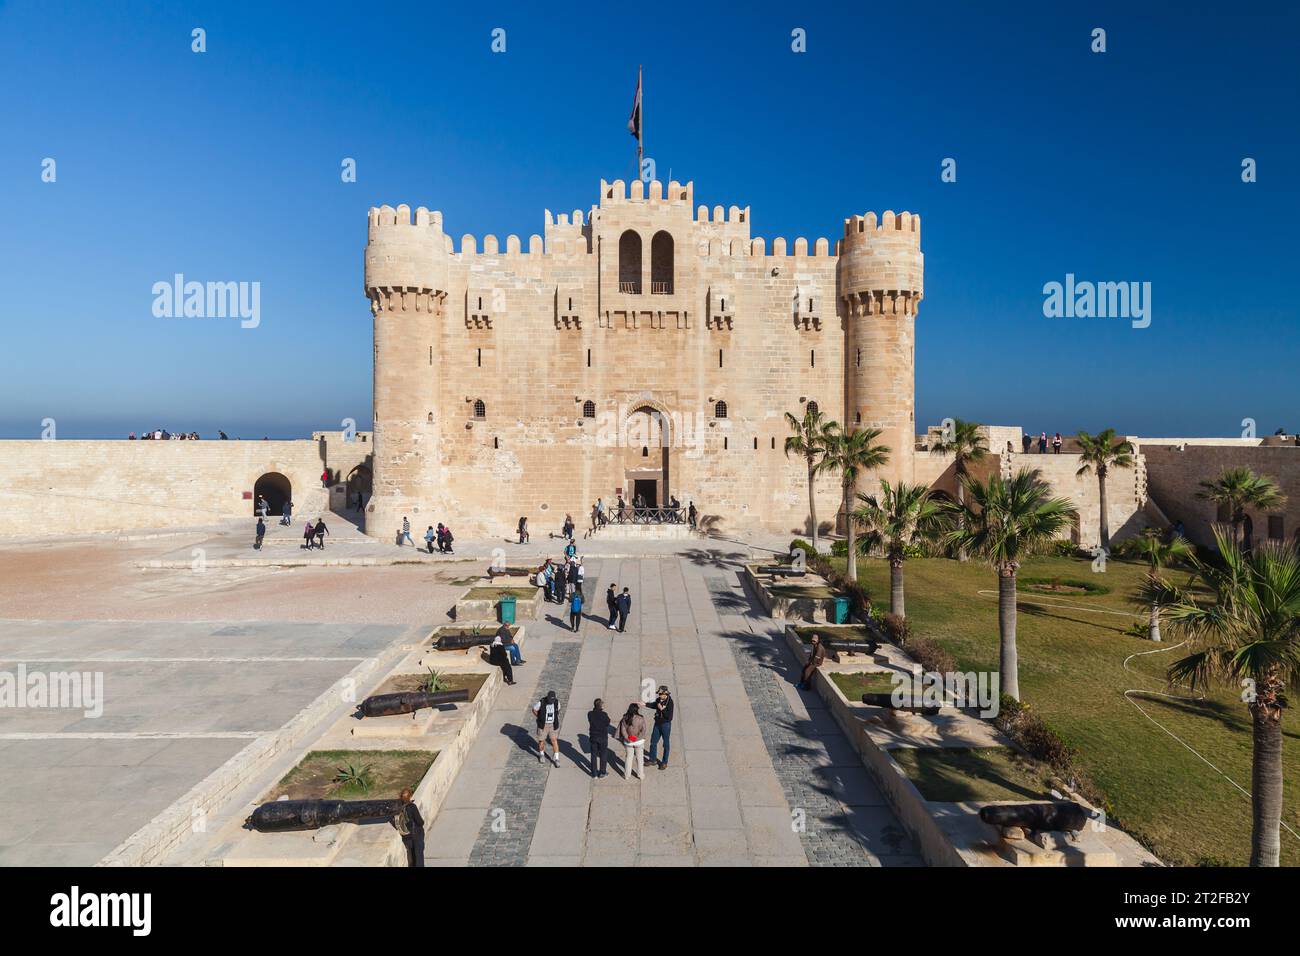 Alexandria, Egypt - December 14, 2018: People walk in front of The Citadel of Qaitbay or the Fort of Qaitbay. It is a 15th-century defensive fortress Stock Photo